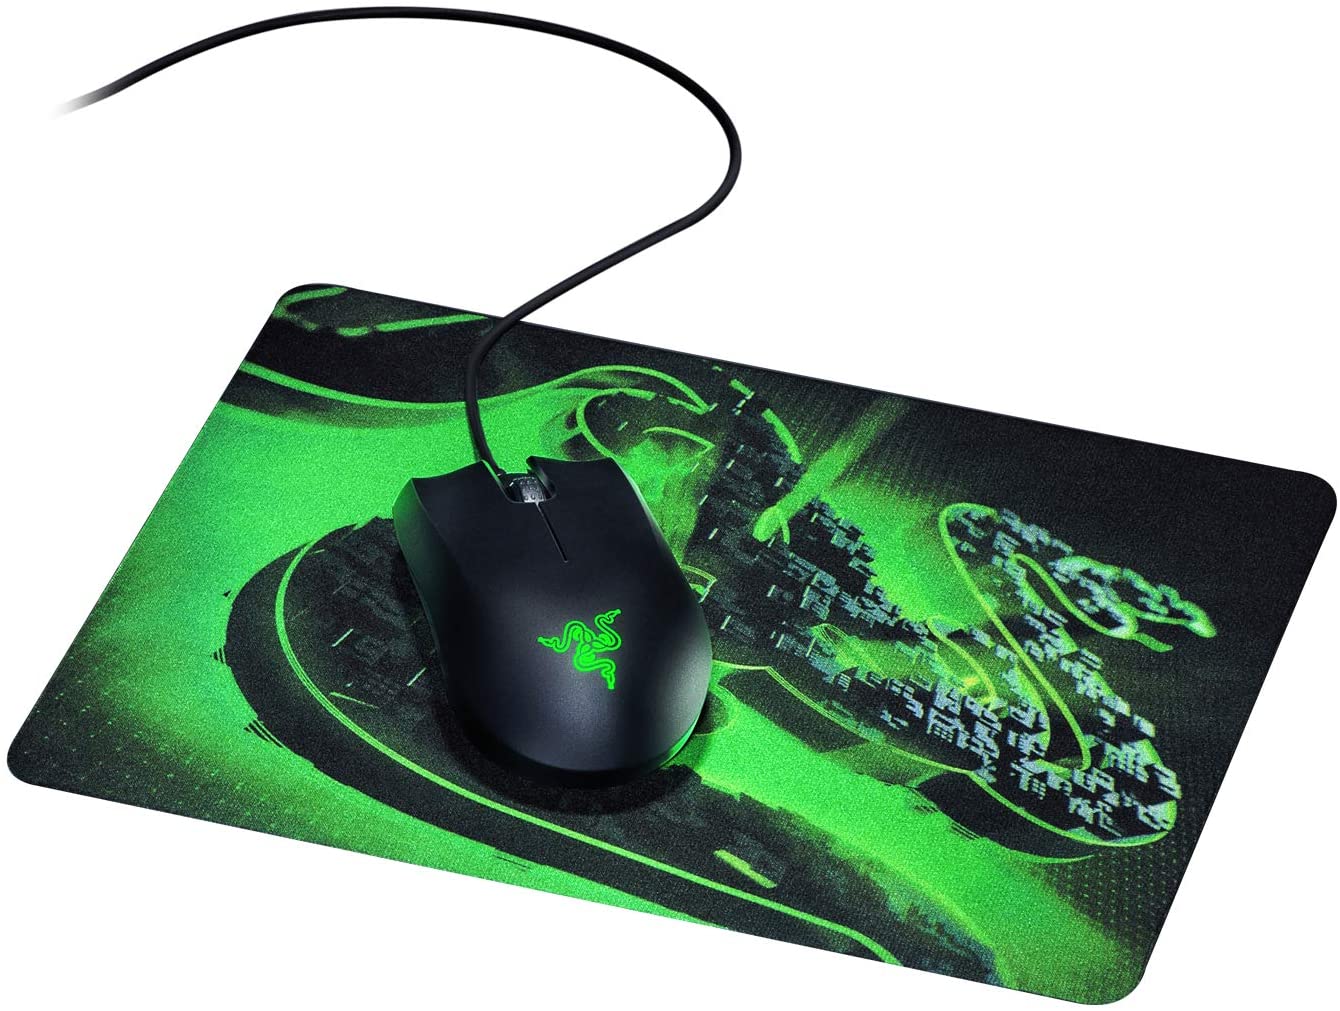 Razer Abyssus Lite Gaming Mouse + Goliathus Mobile Mousepad Construct Edition